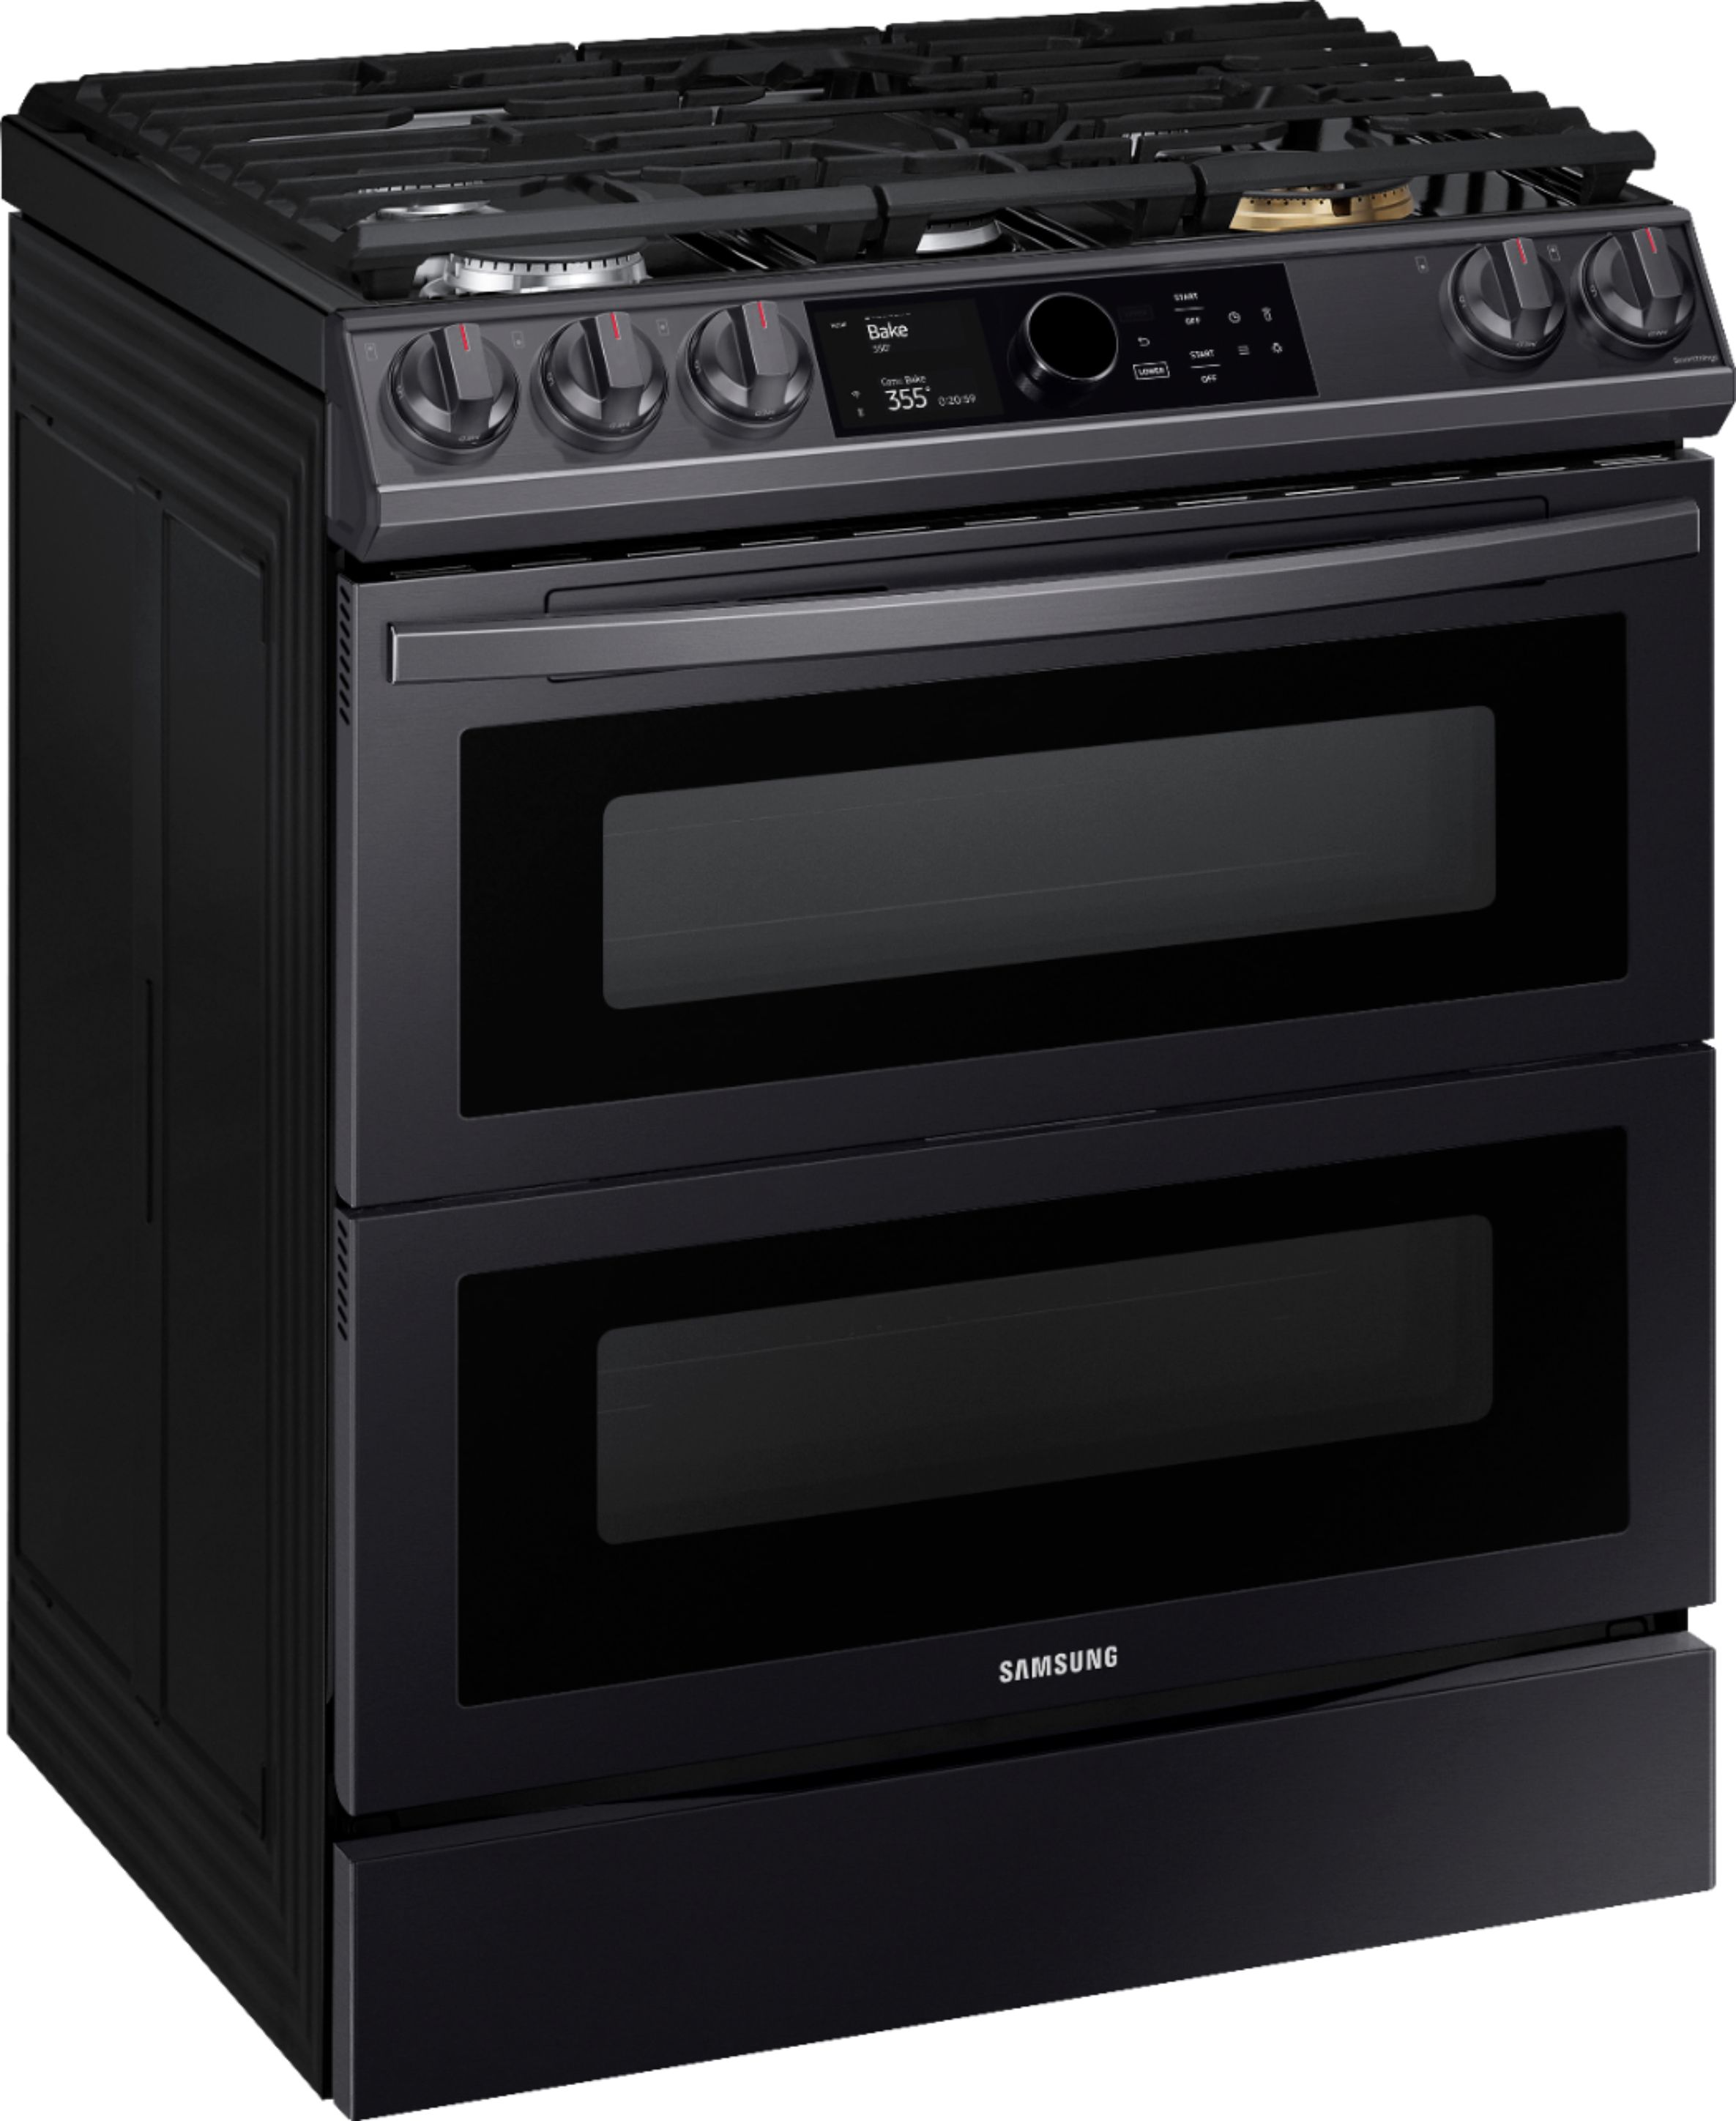 Angle View: GE Profile - 5.3 Cu. Ft. Freestanding Smart Gas True Convection Range with Hot Air Fry - Fingerprint Resistant Black Stainless